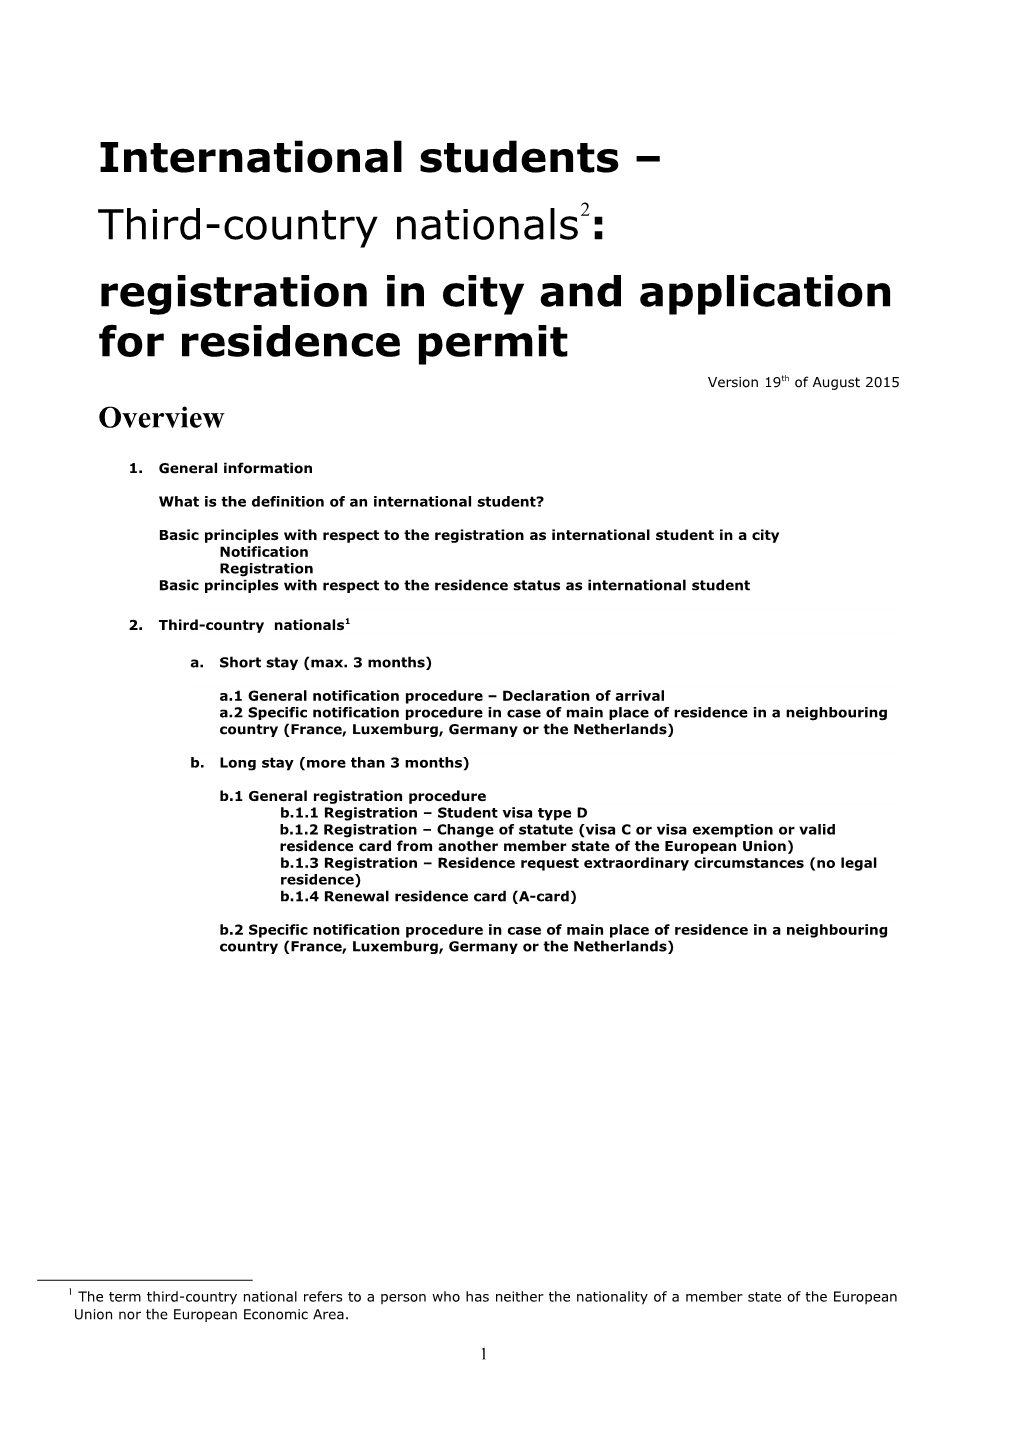 Registration in City and Application for Residence Permit